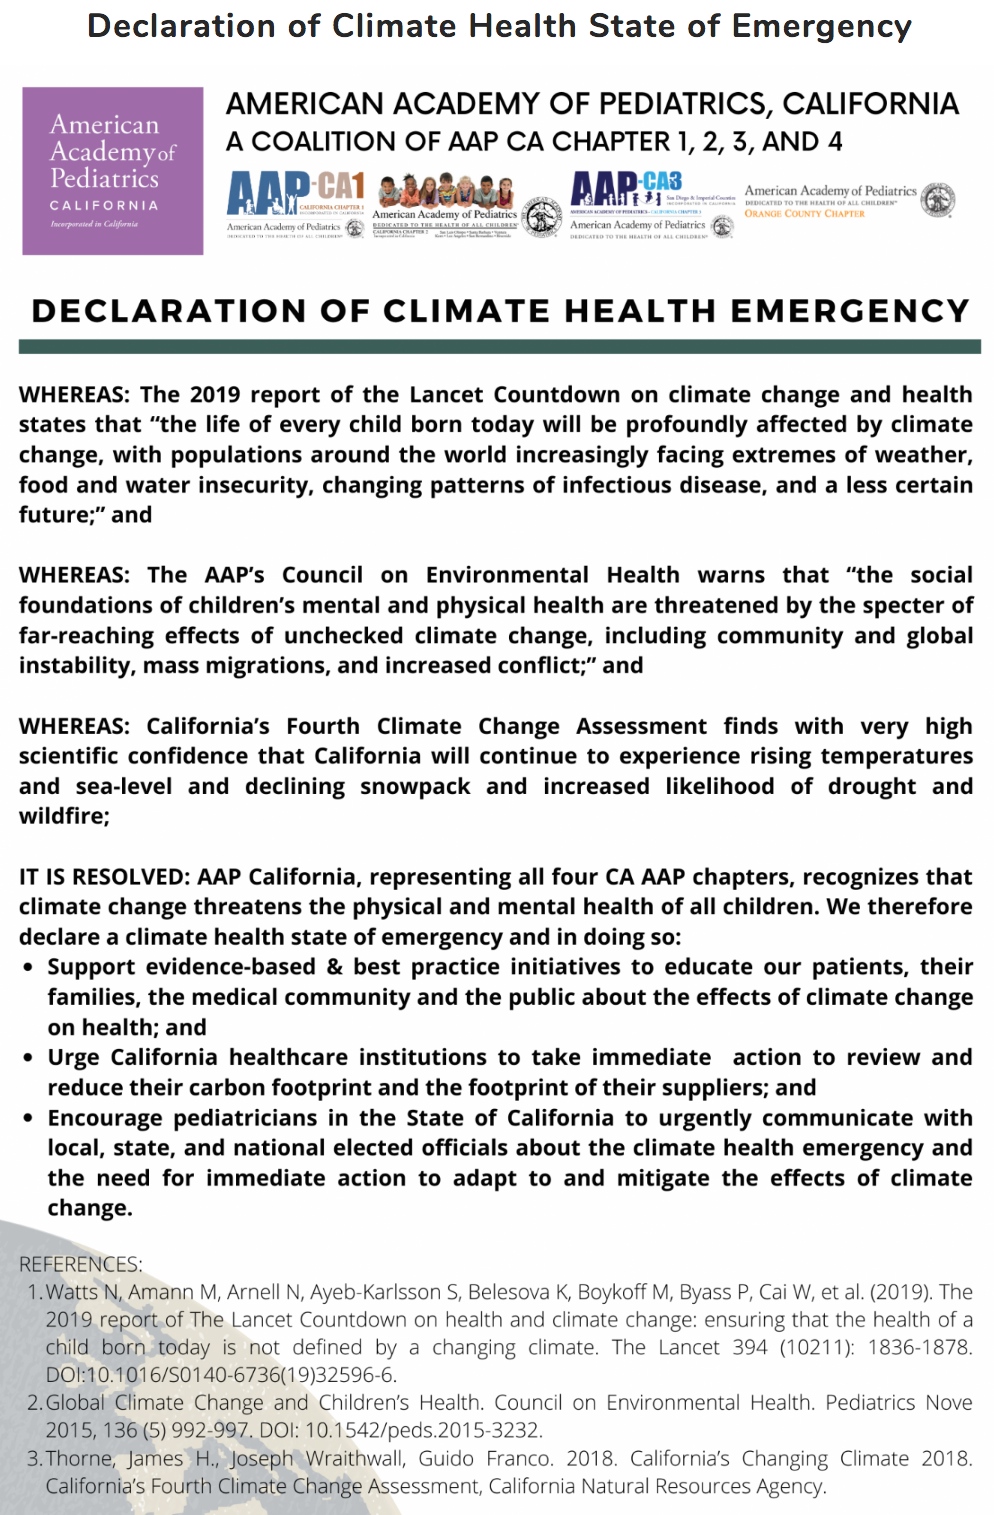 Declaration of Climate Health State of Emergency